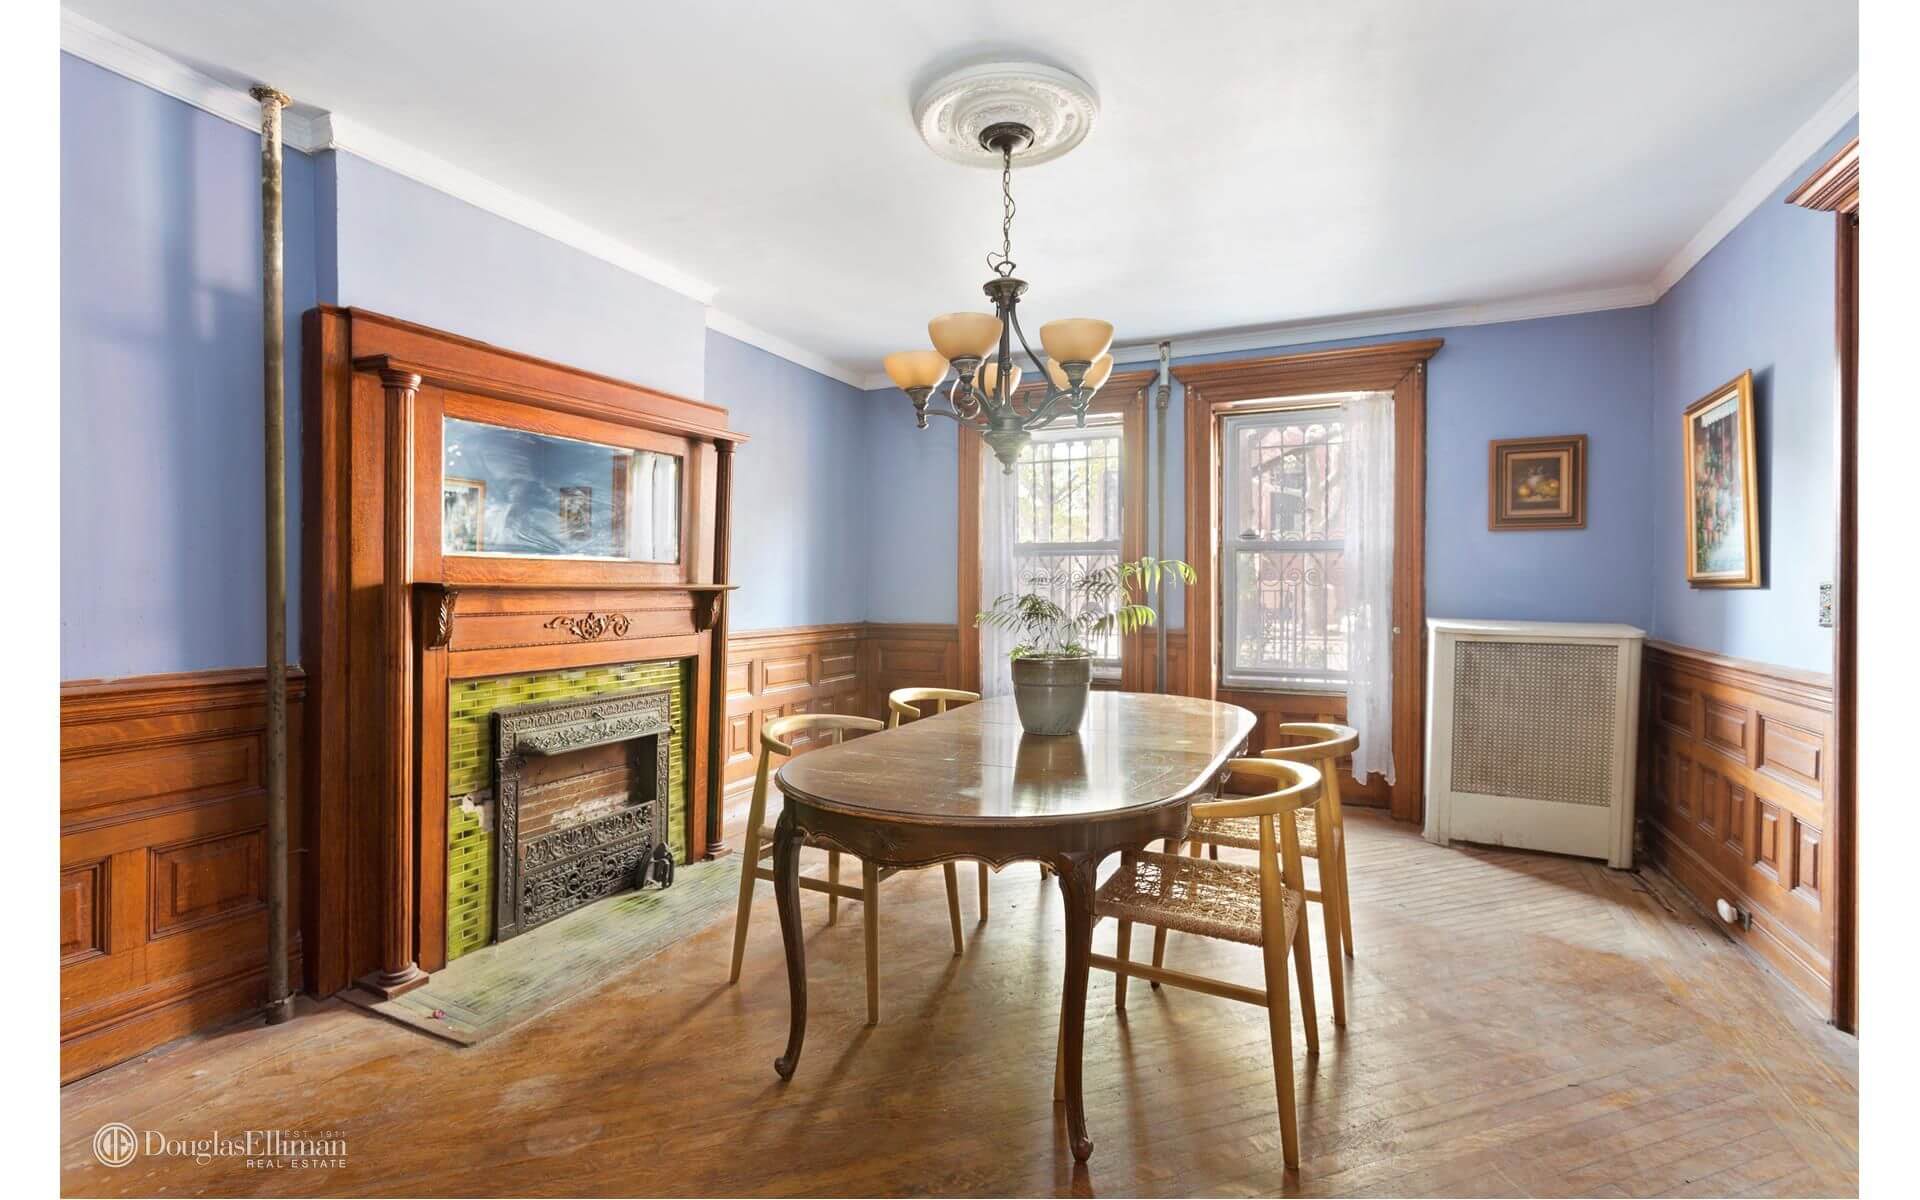 Brooklyn Homes for Sale in Prospect Lefferts Gardens at 120 Midwood Street